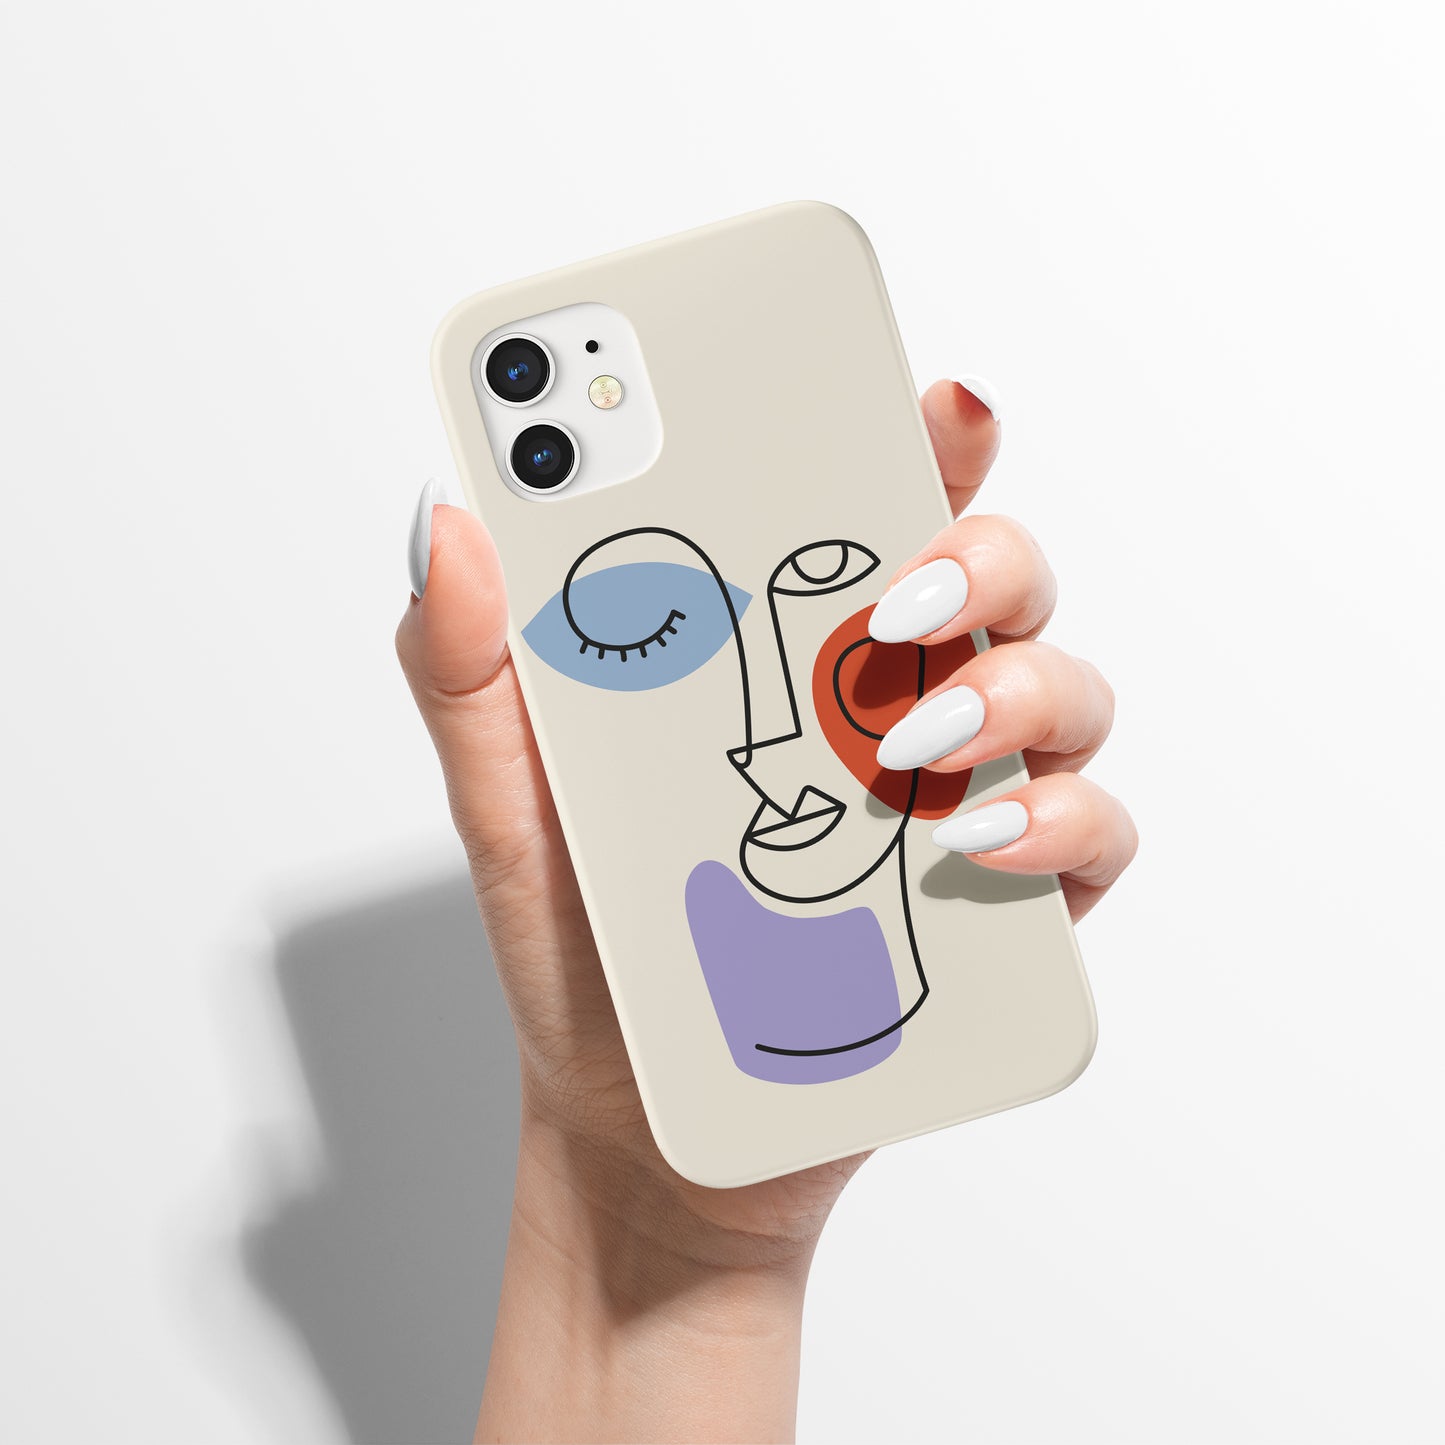 Picasso Inspired Line Art iPhone Case